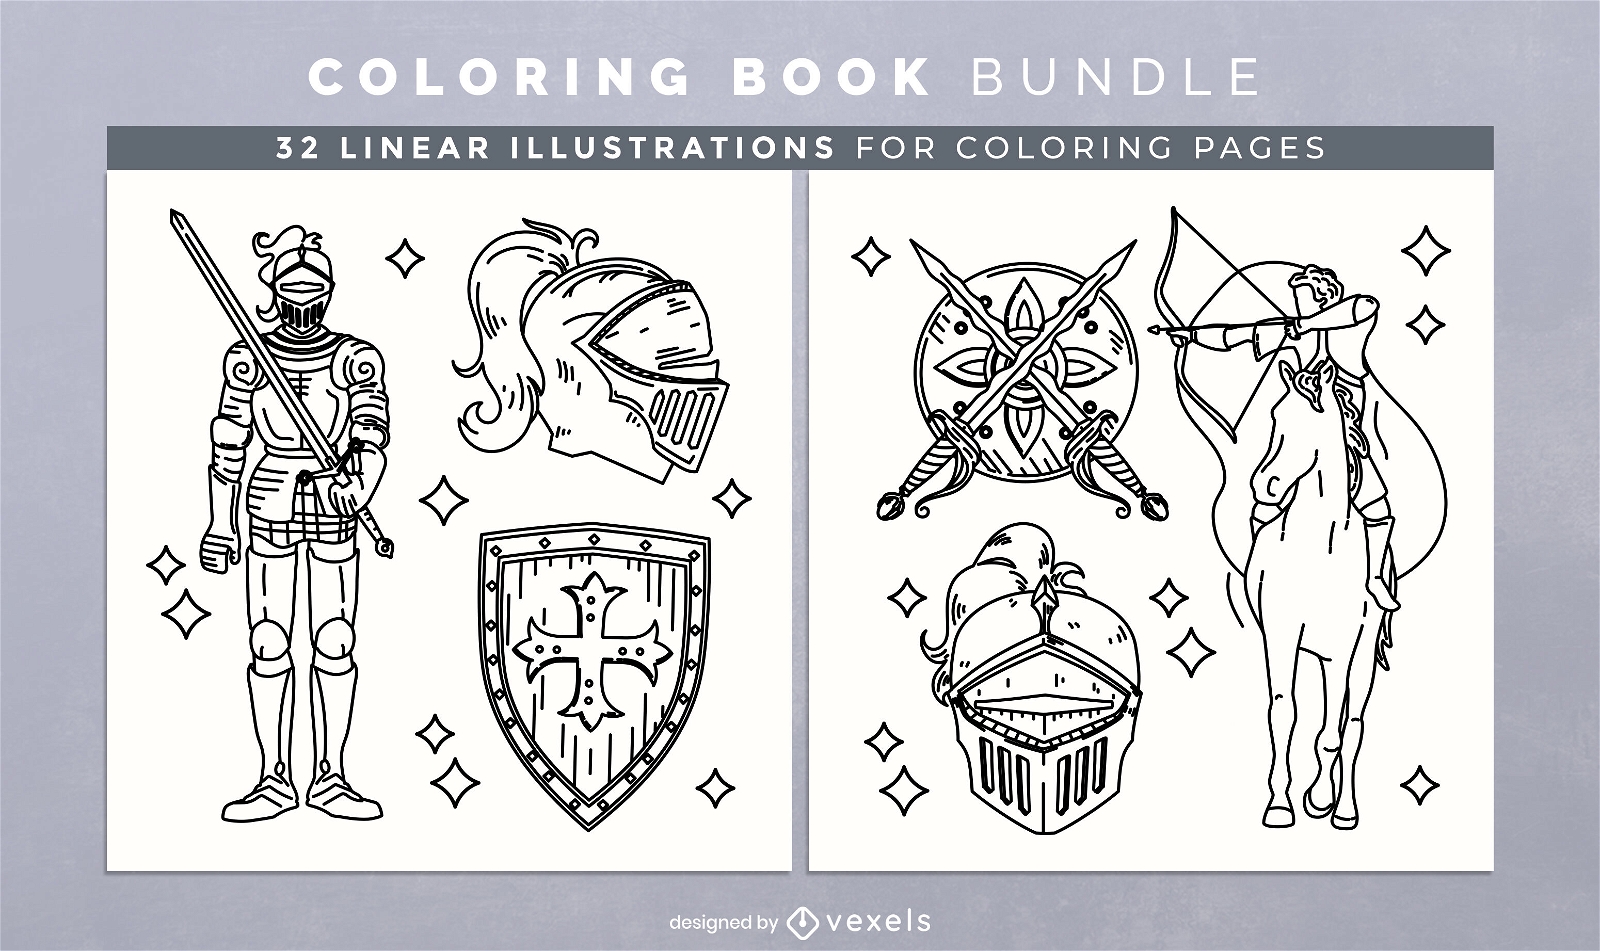 medieval coloring book pages